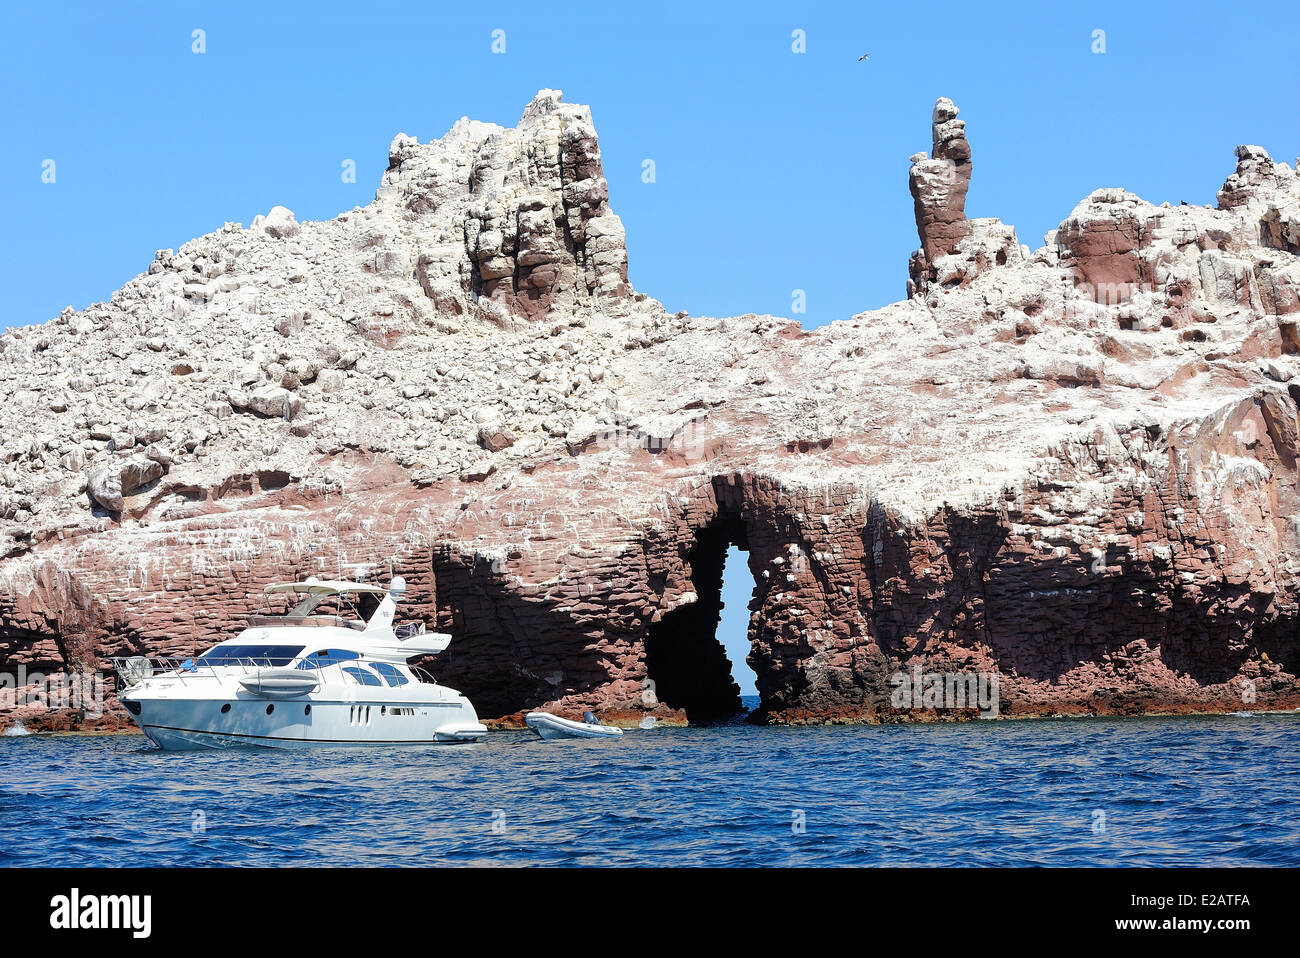 Mexico, Baja California Sur State, Sea of Cortez, listed as World Heritage by UNESCO, Los Islotes Island Stock Photo